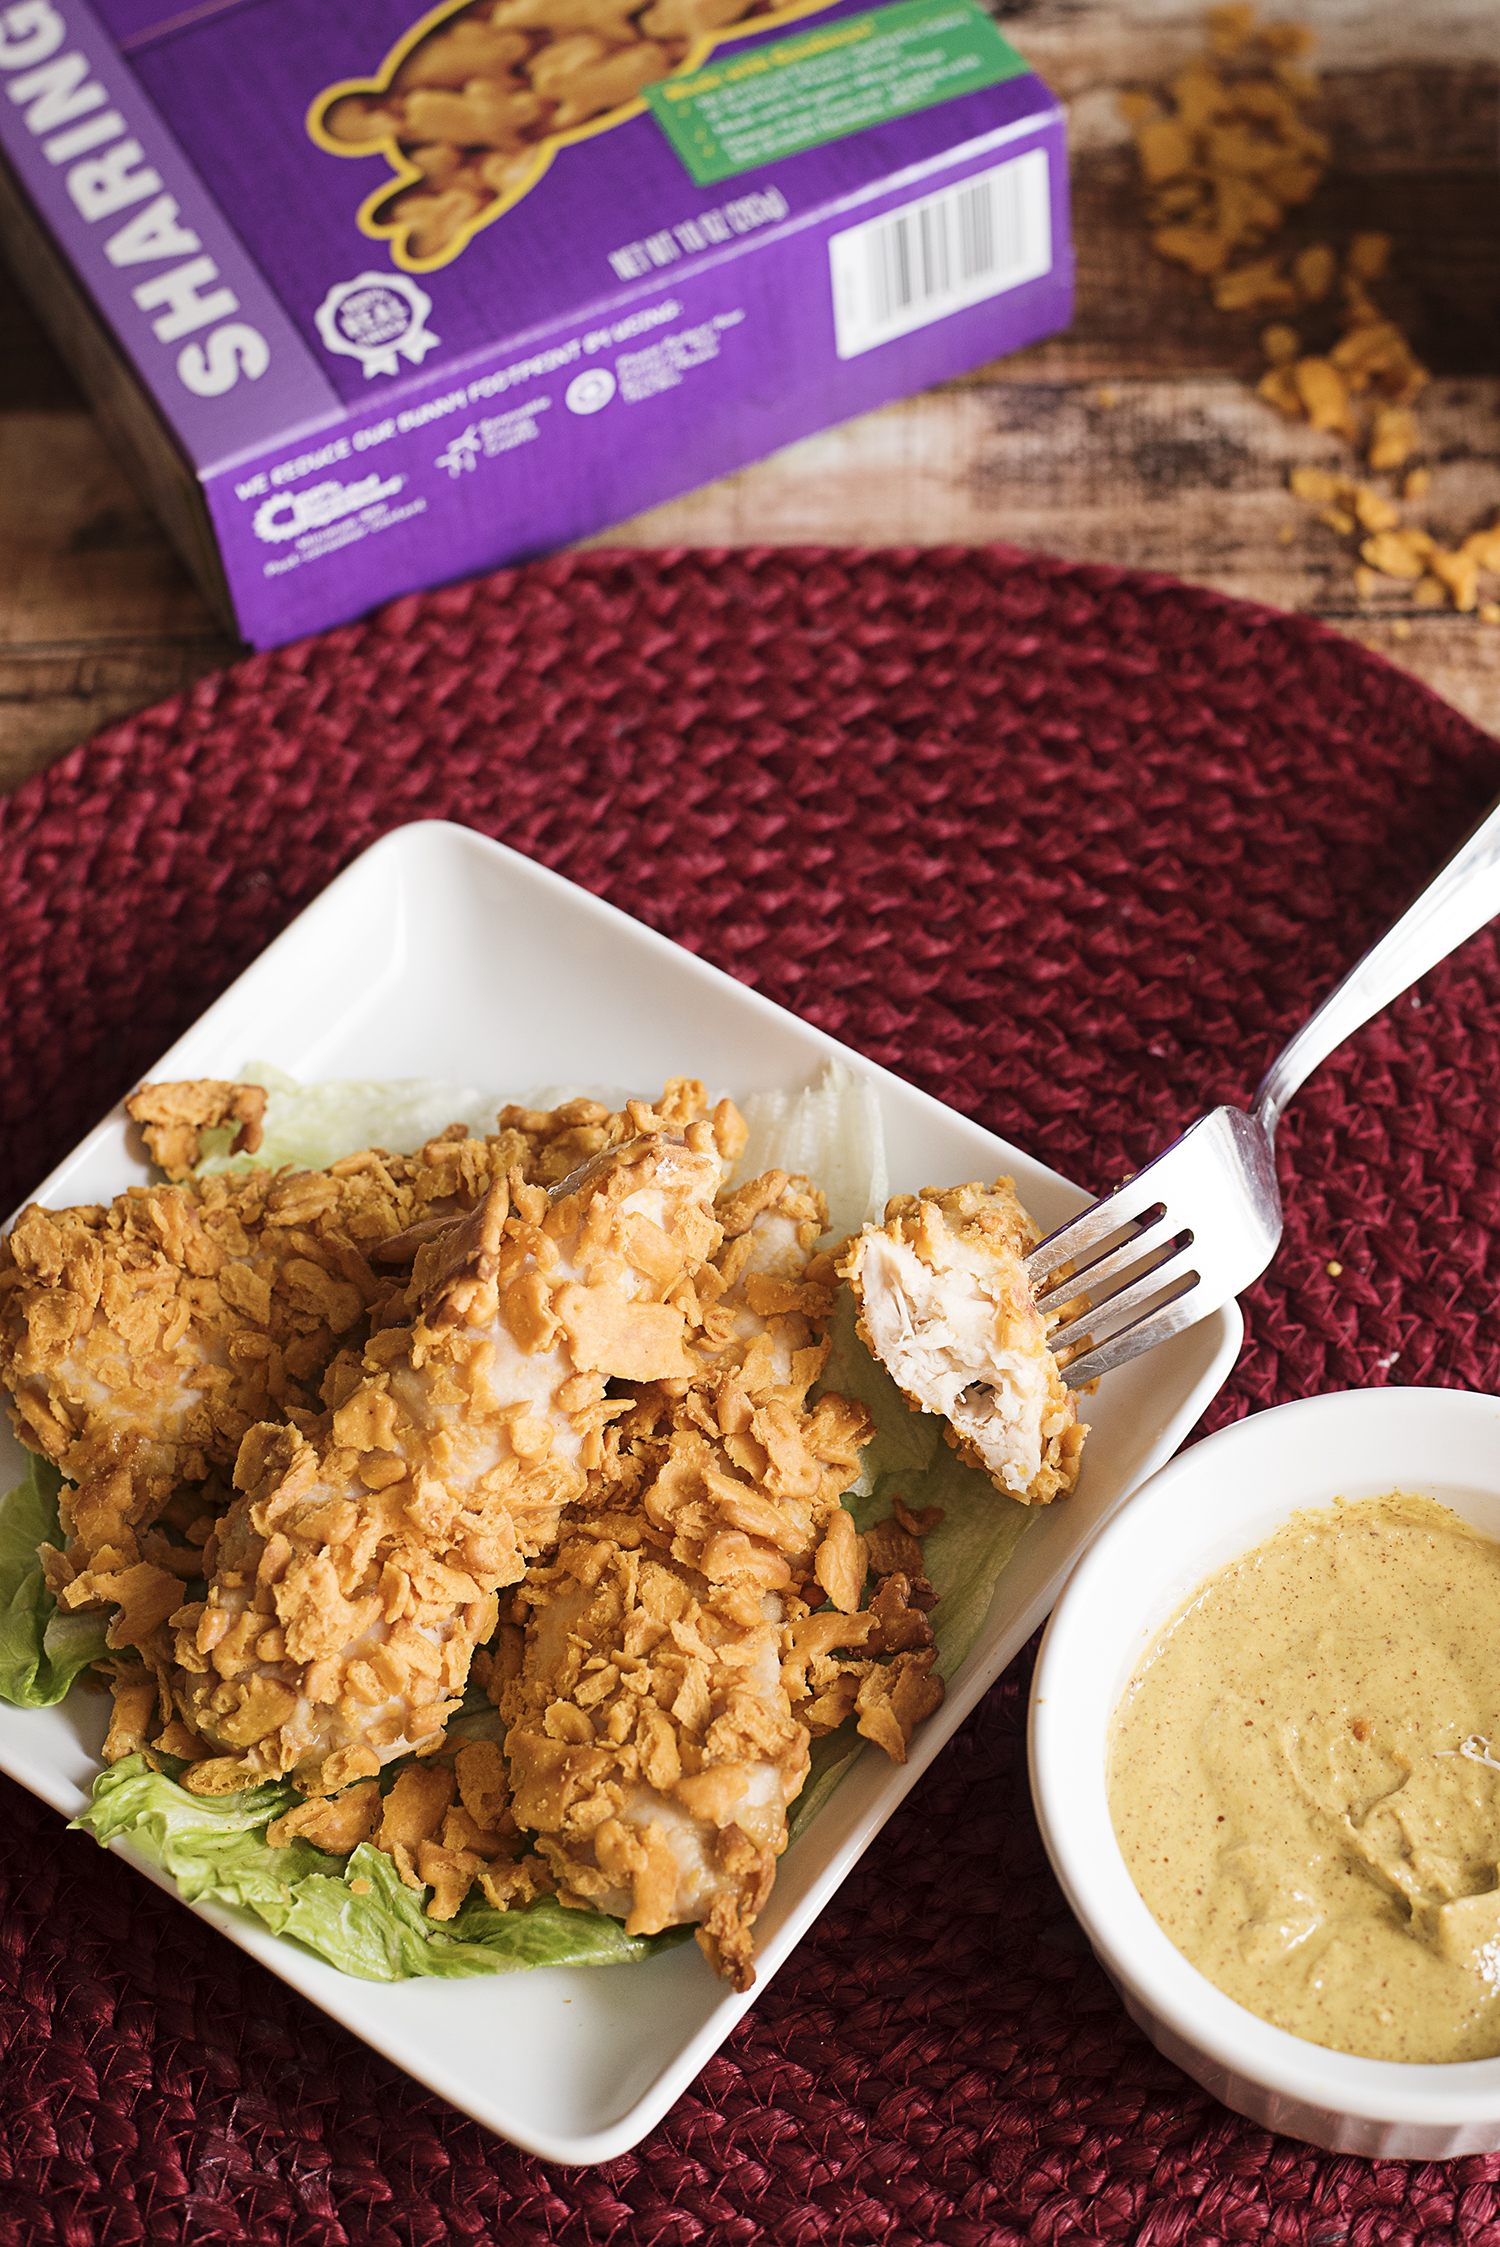 Looking to try a recipe for baked chicken fingers that are healthy and easy to make? These baked cheddar crusted chicken fingers are so easy to make and they make for a healthy kids dinner! Try it!